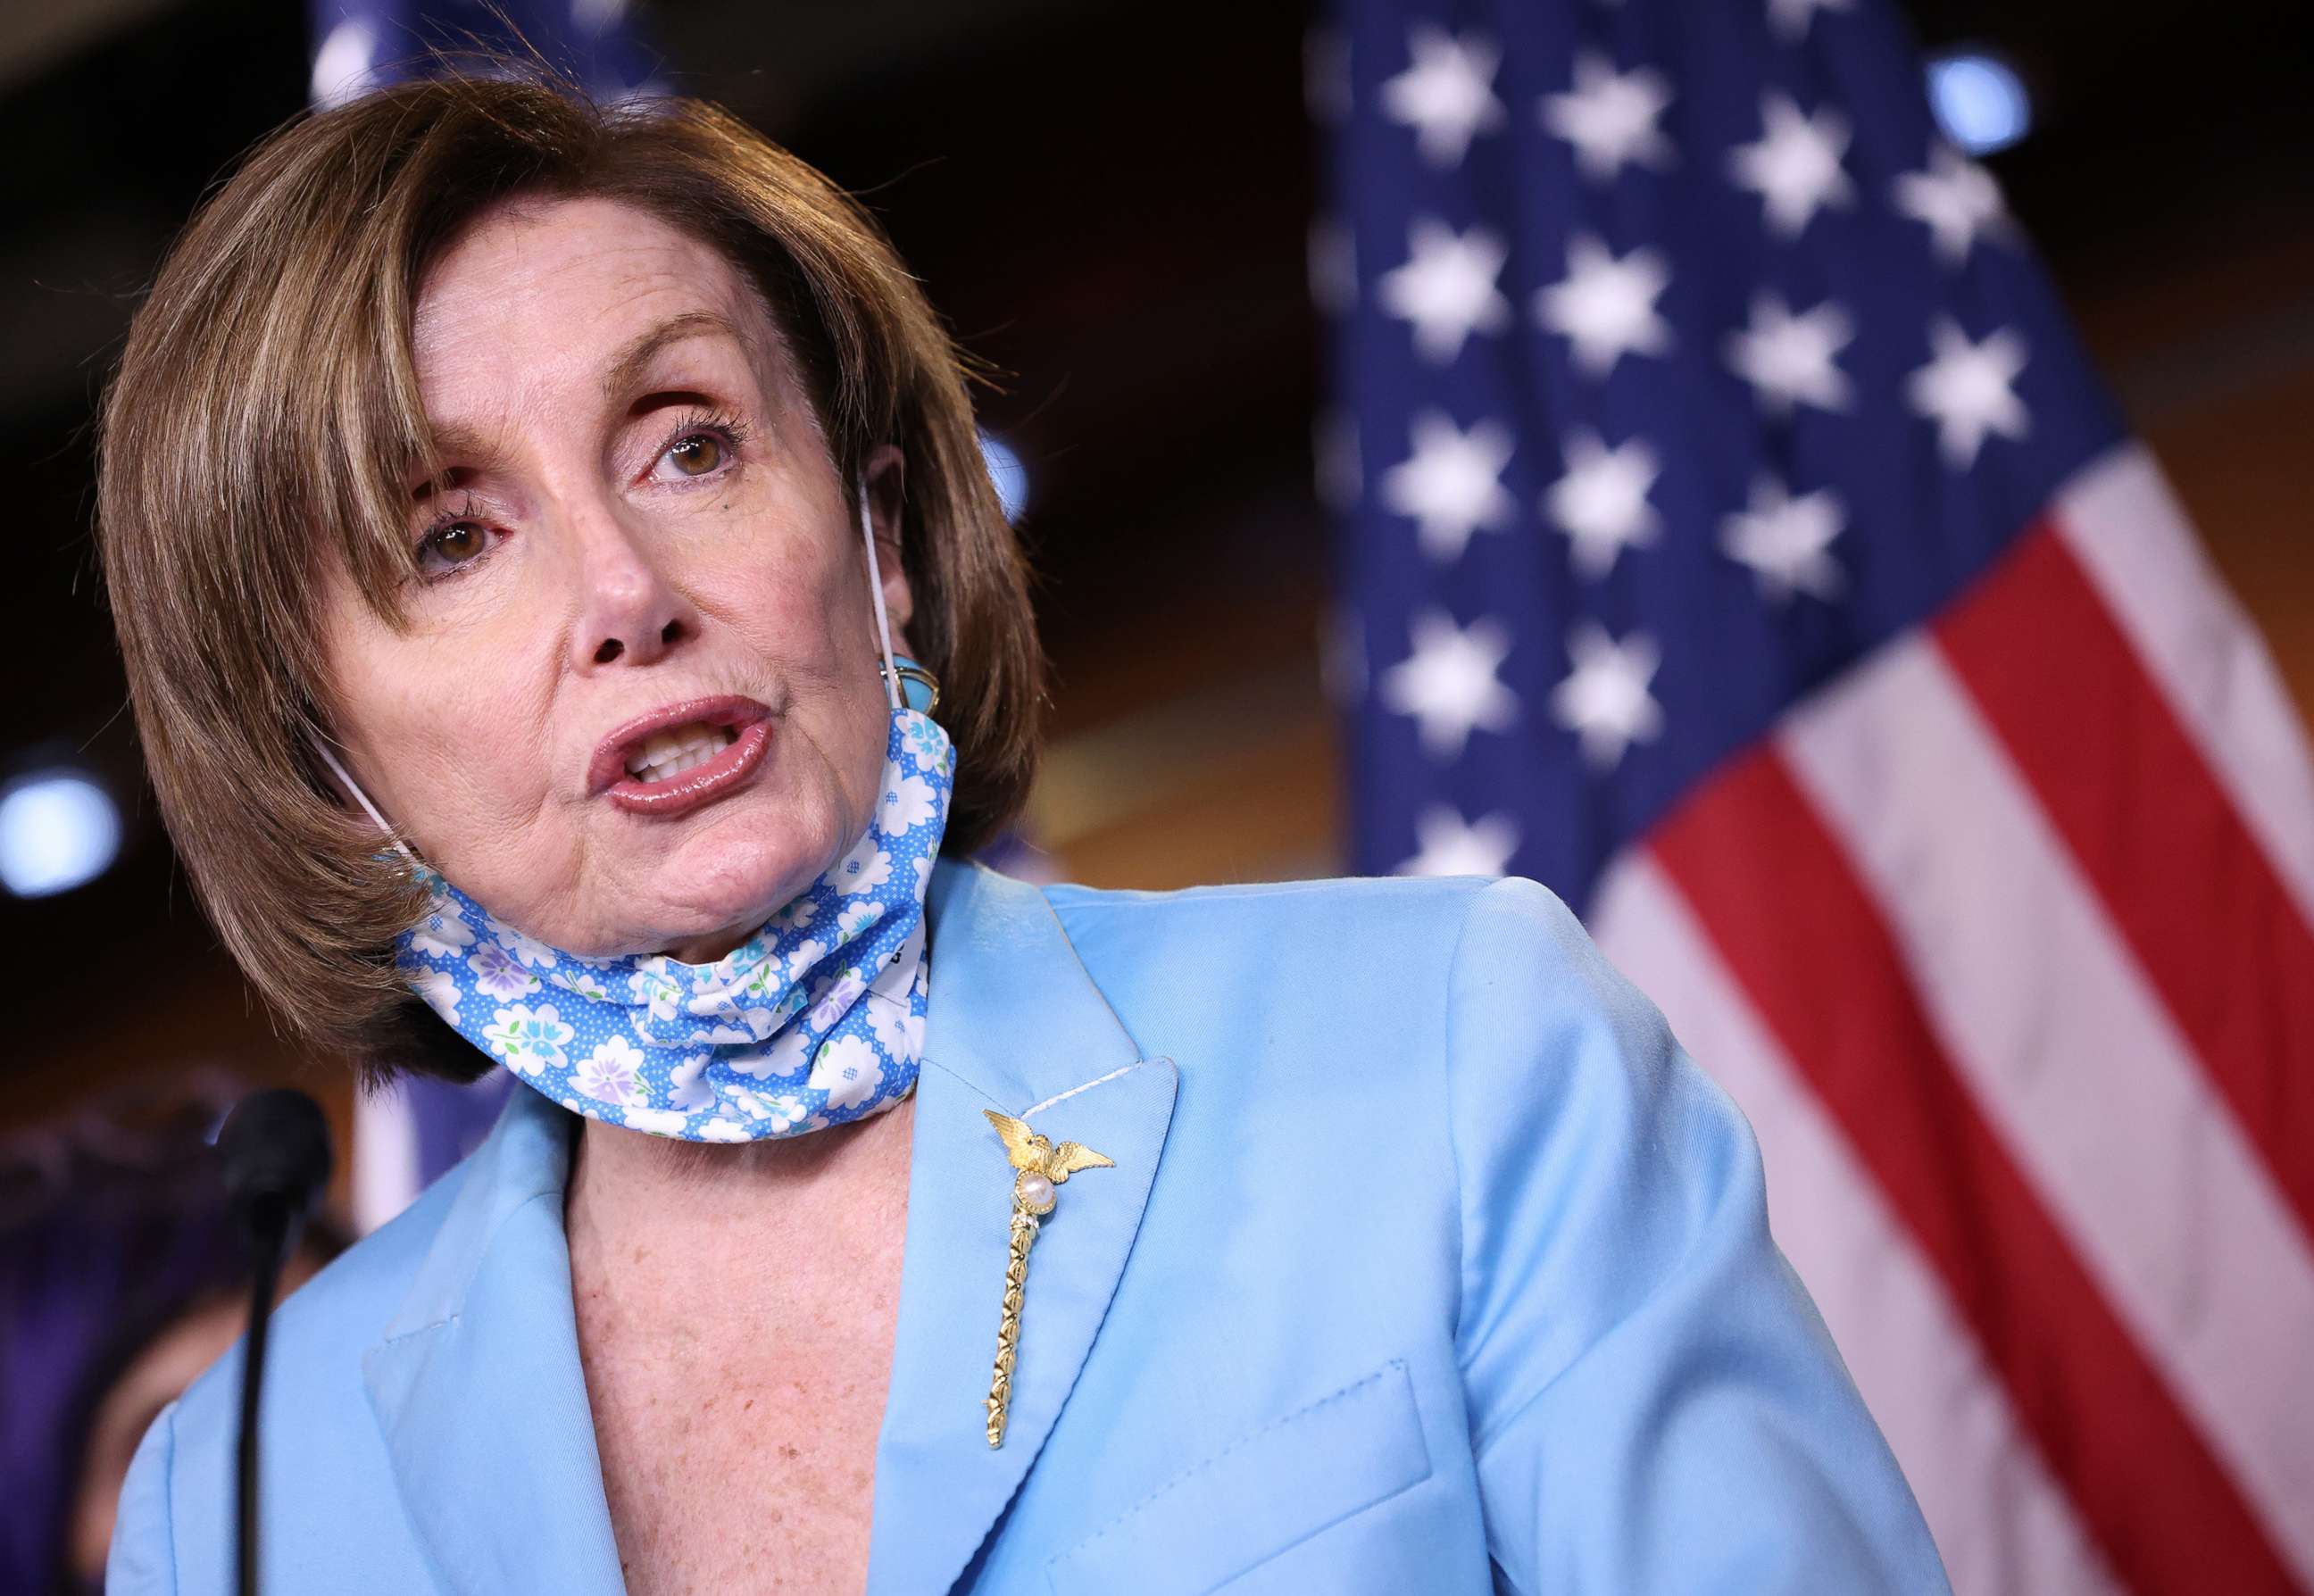 PHOTO: Speaker of the House Nancy Pelosi answers questions at a press conference on the establishment of a commission to investigate the events surrounding the January 6 insurrection at the Capitol, May 19, 2021, in Washington, DC.